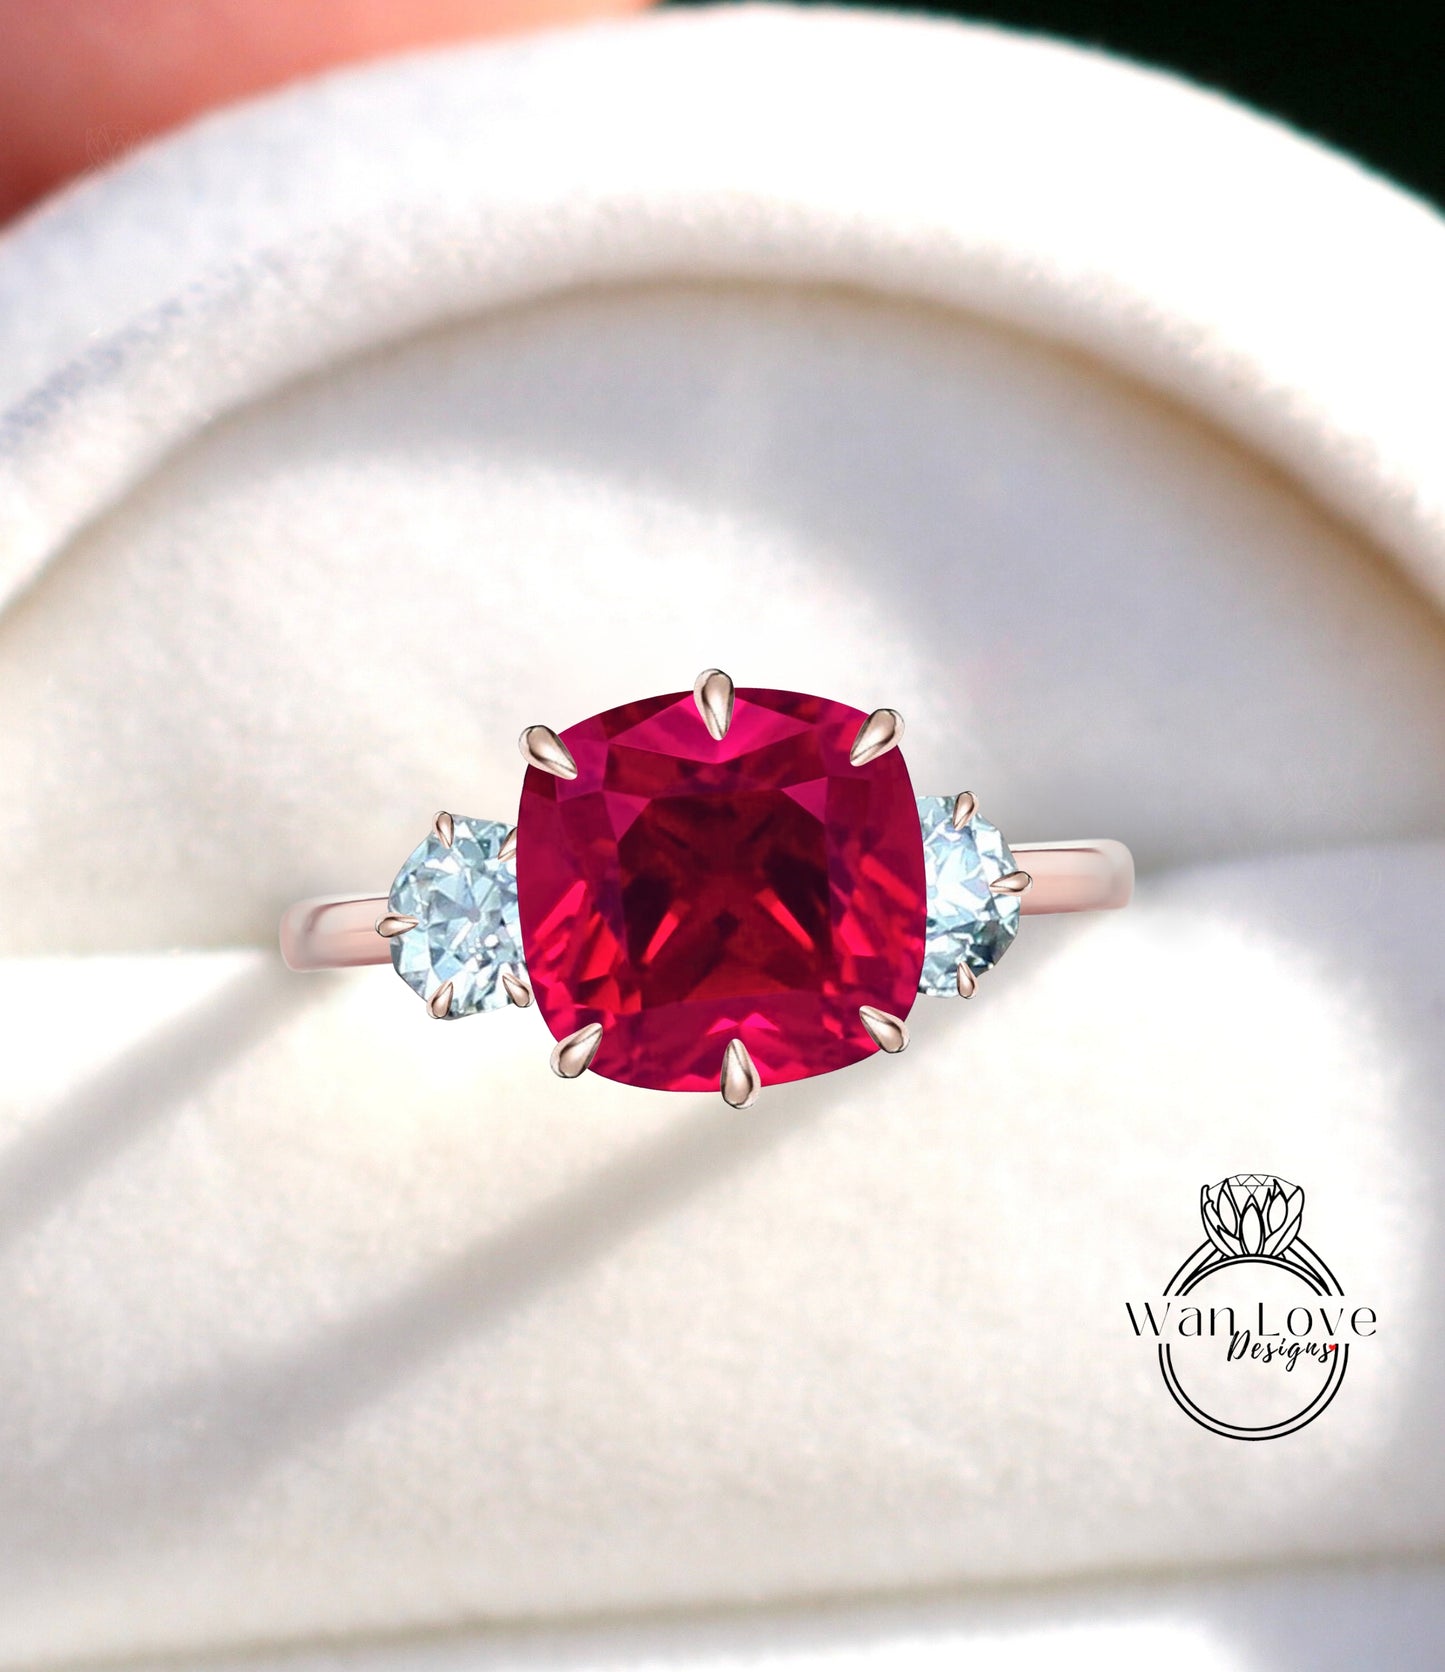 Ruby engagement ring three stone ring OMC solid gold ring old mine cut ring vintage OEC ring art deco ring Cushion Ruby moissanite ring